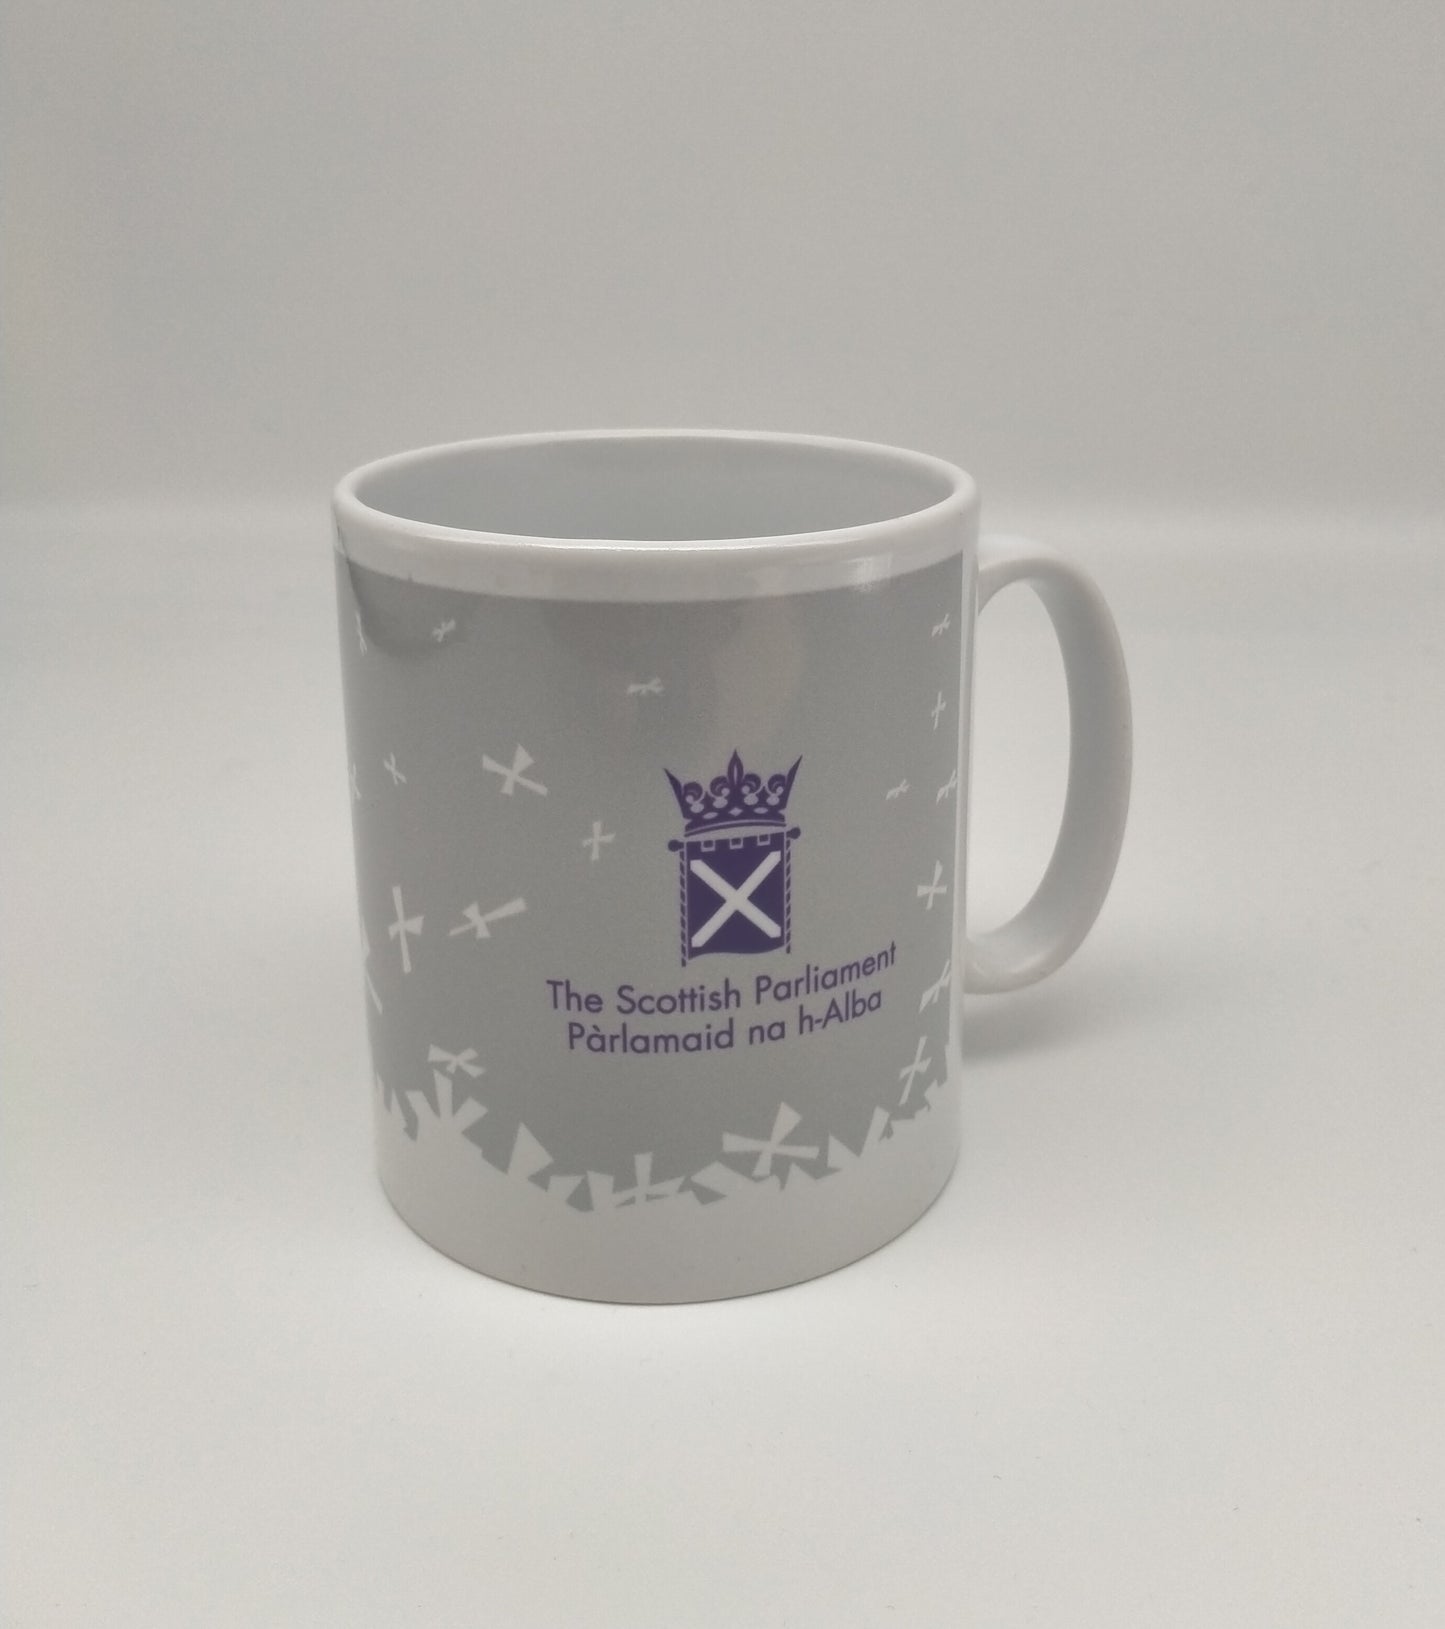 White mug printed with with white Parliament symbol and saltires on grey background.